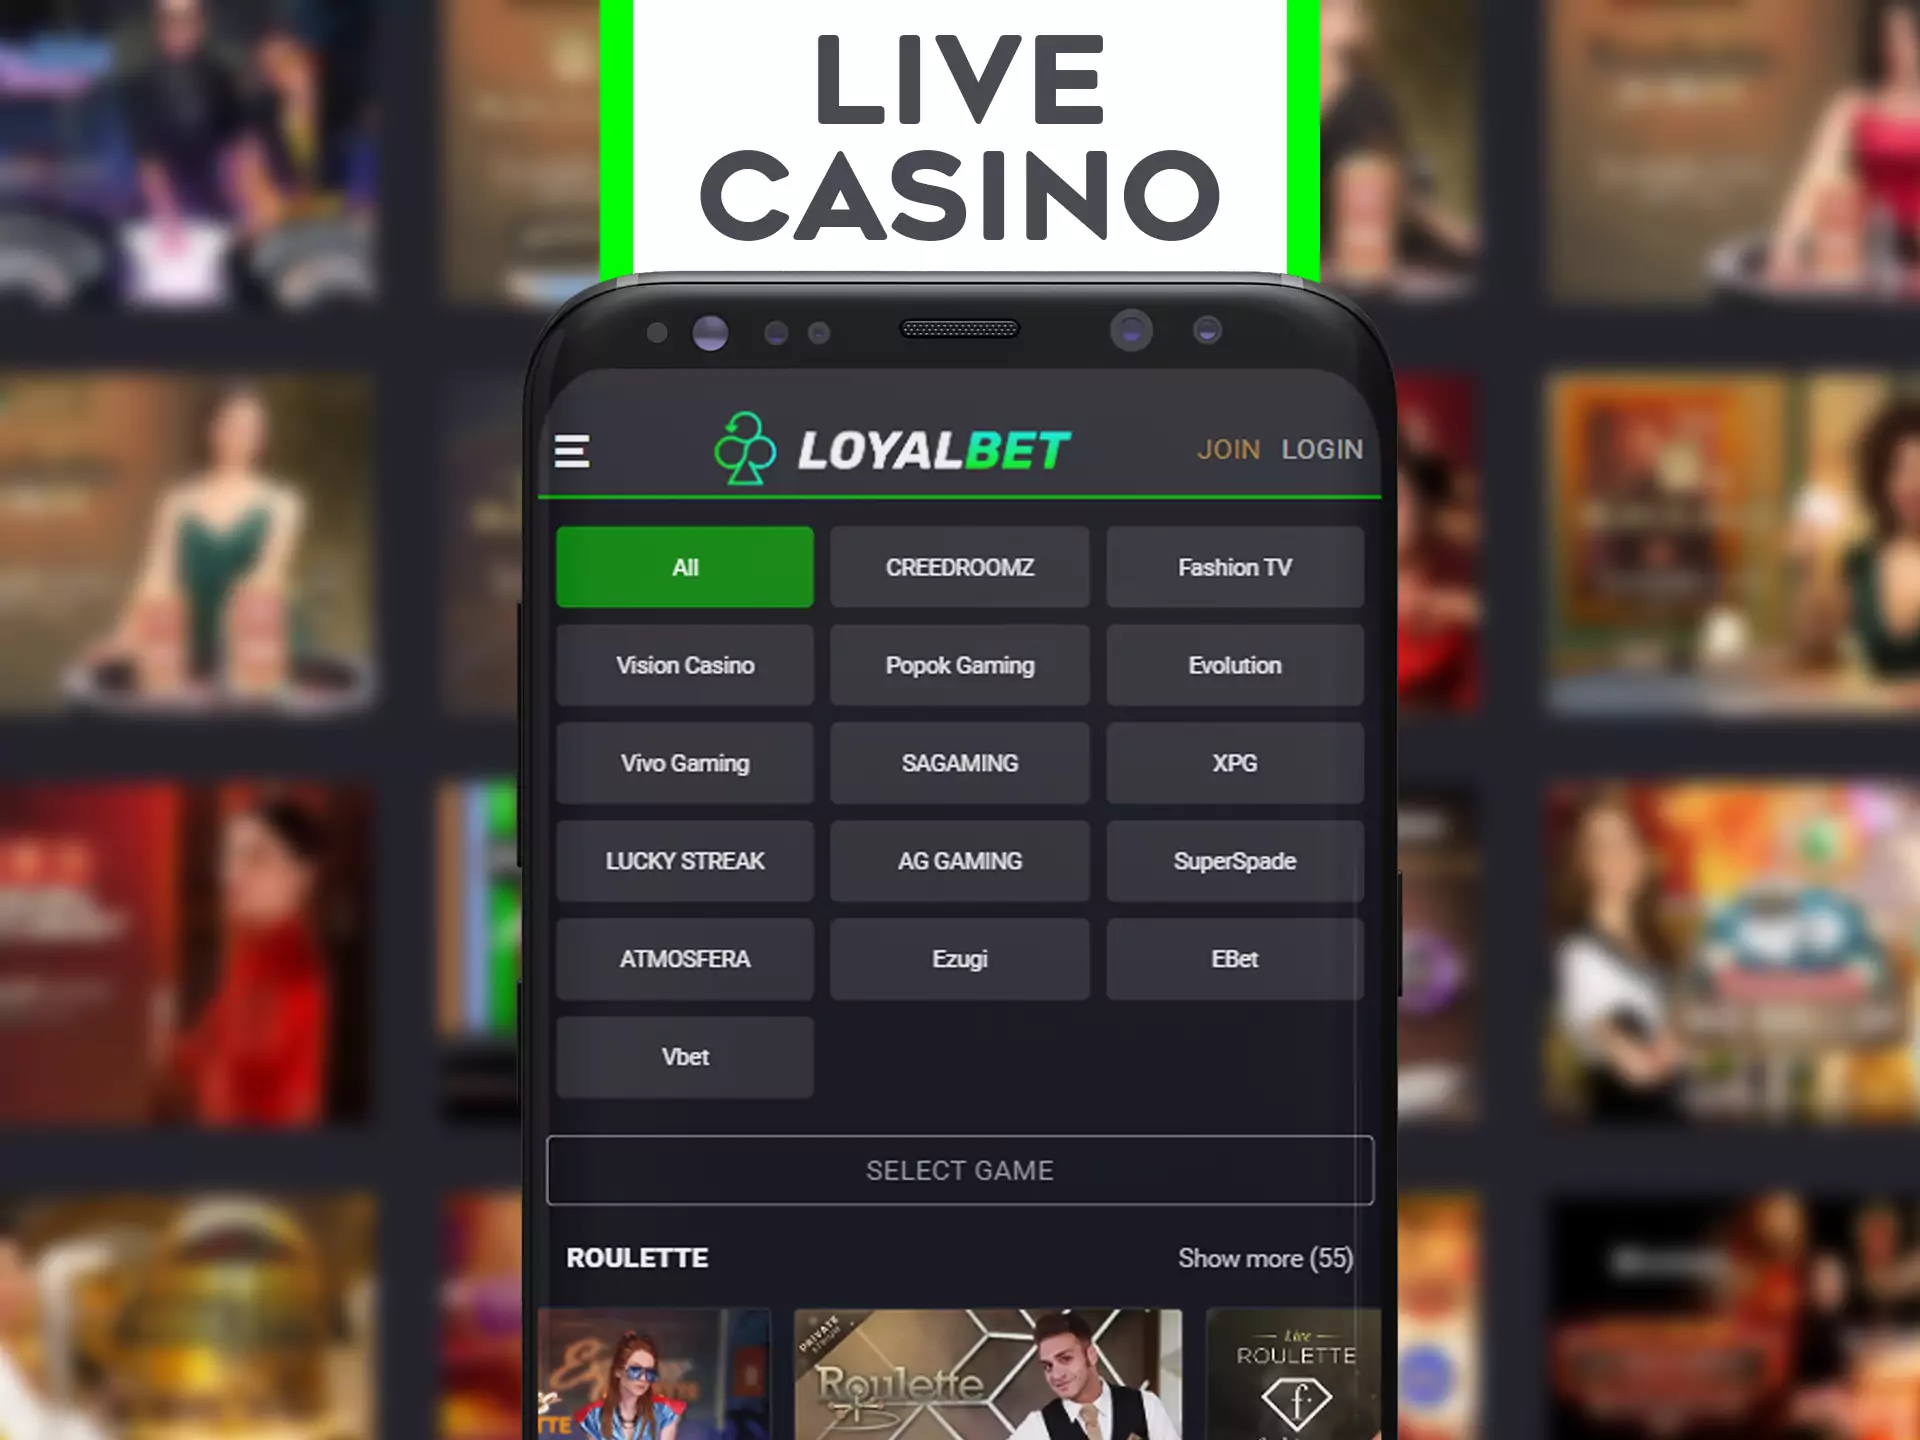 Play live casino games and win big prizes at Linebet.